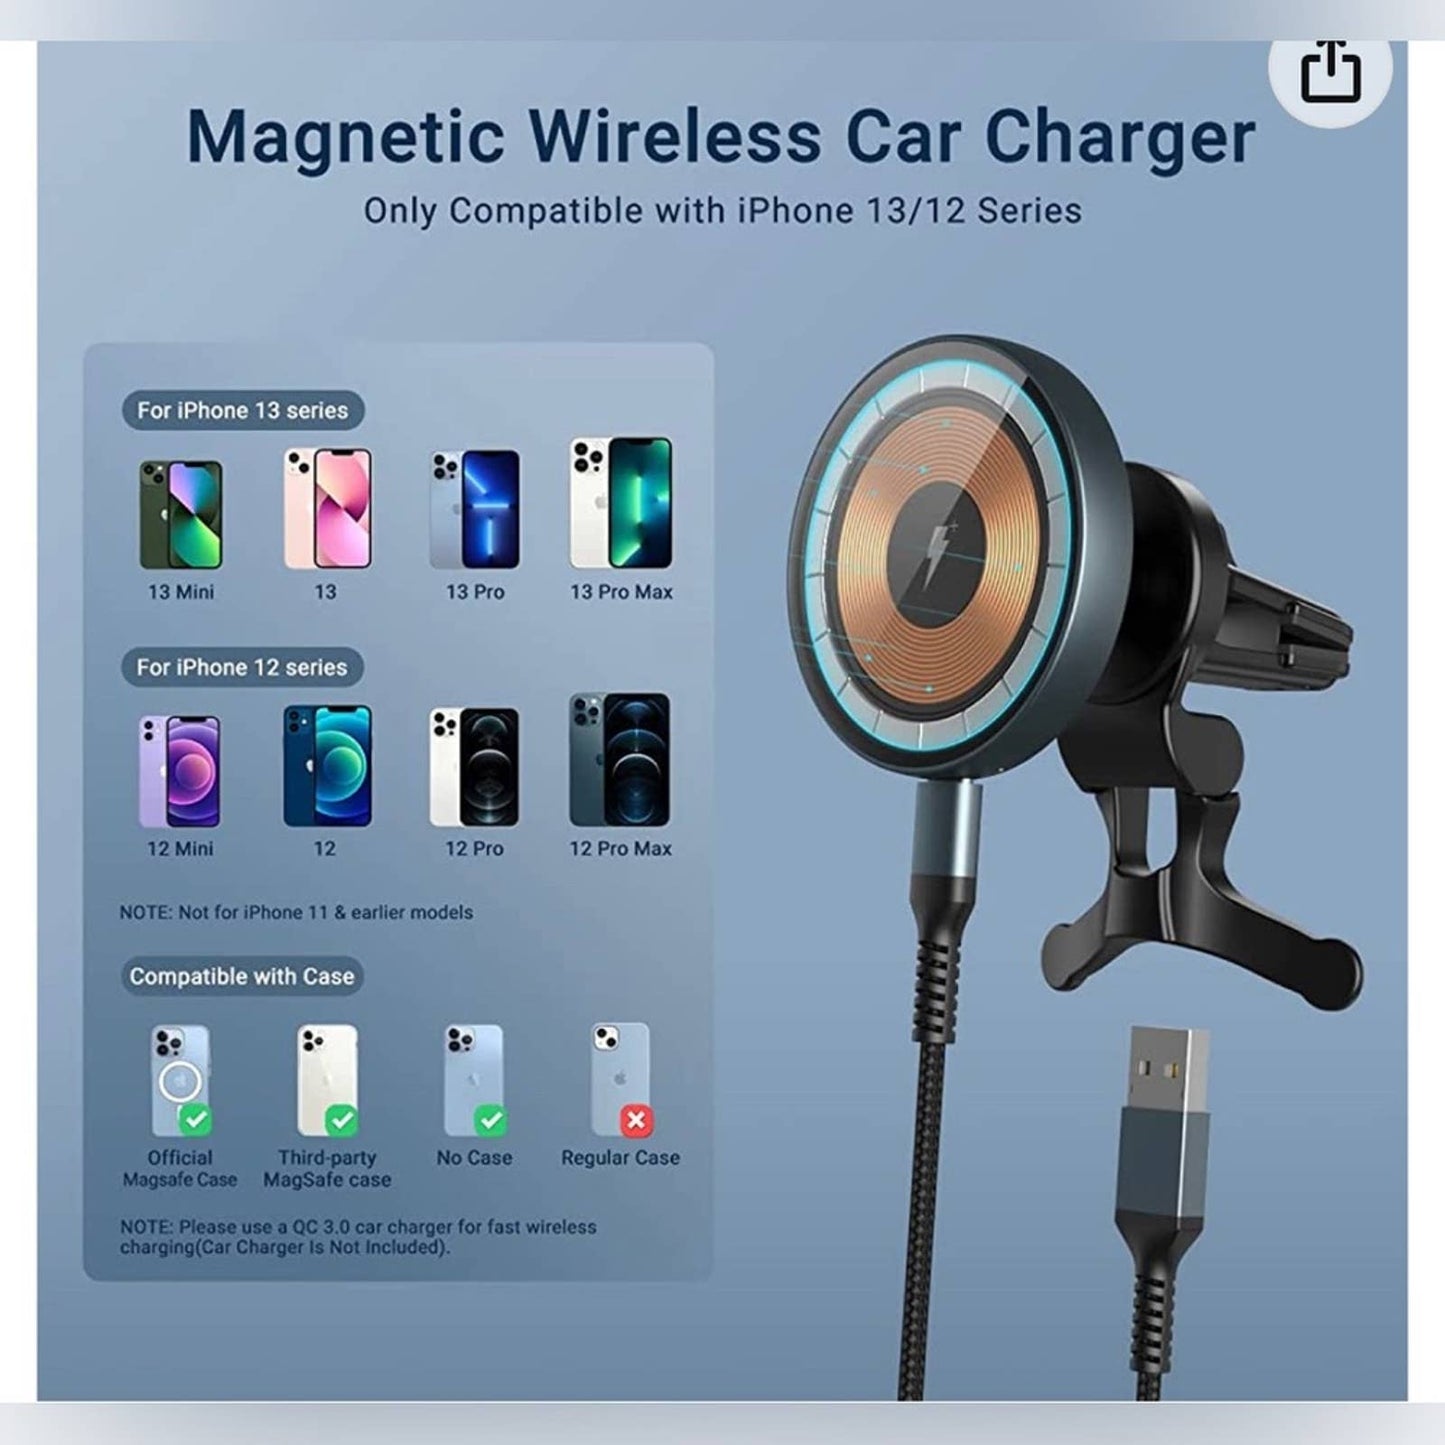 Magnetic Wireless Car Charger, Wireless Car Charger Mount, Magsafe Car Charger